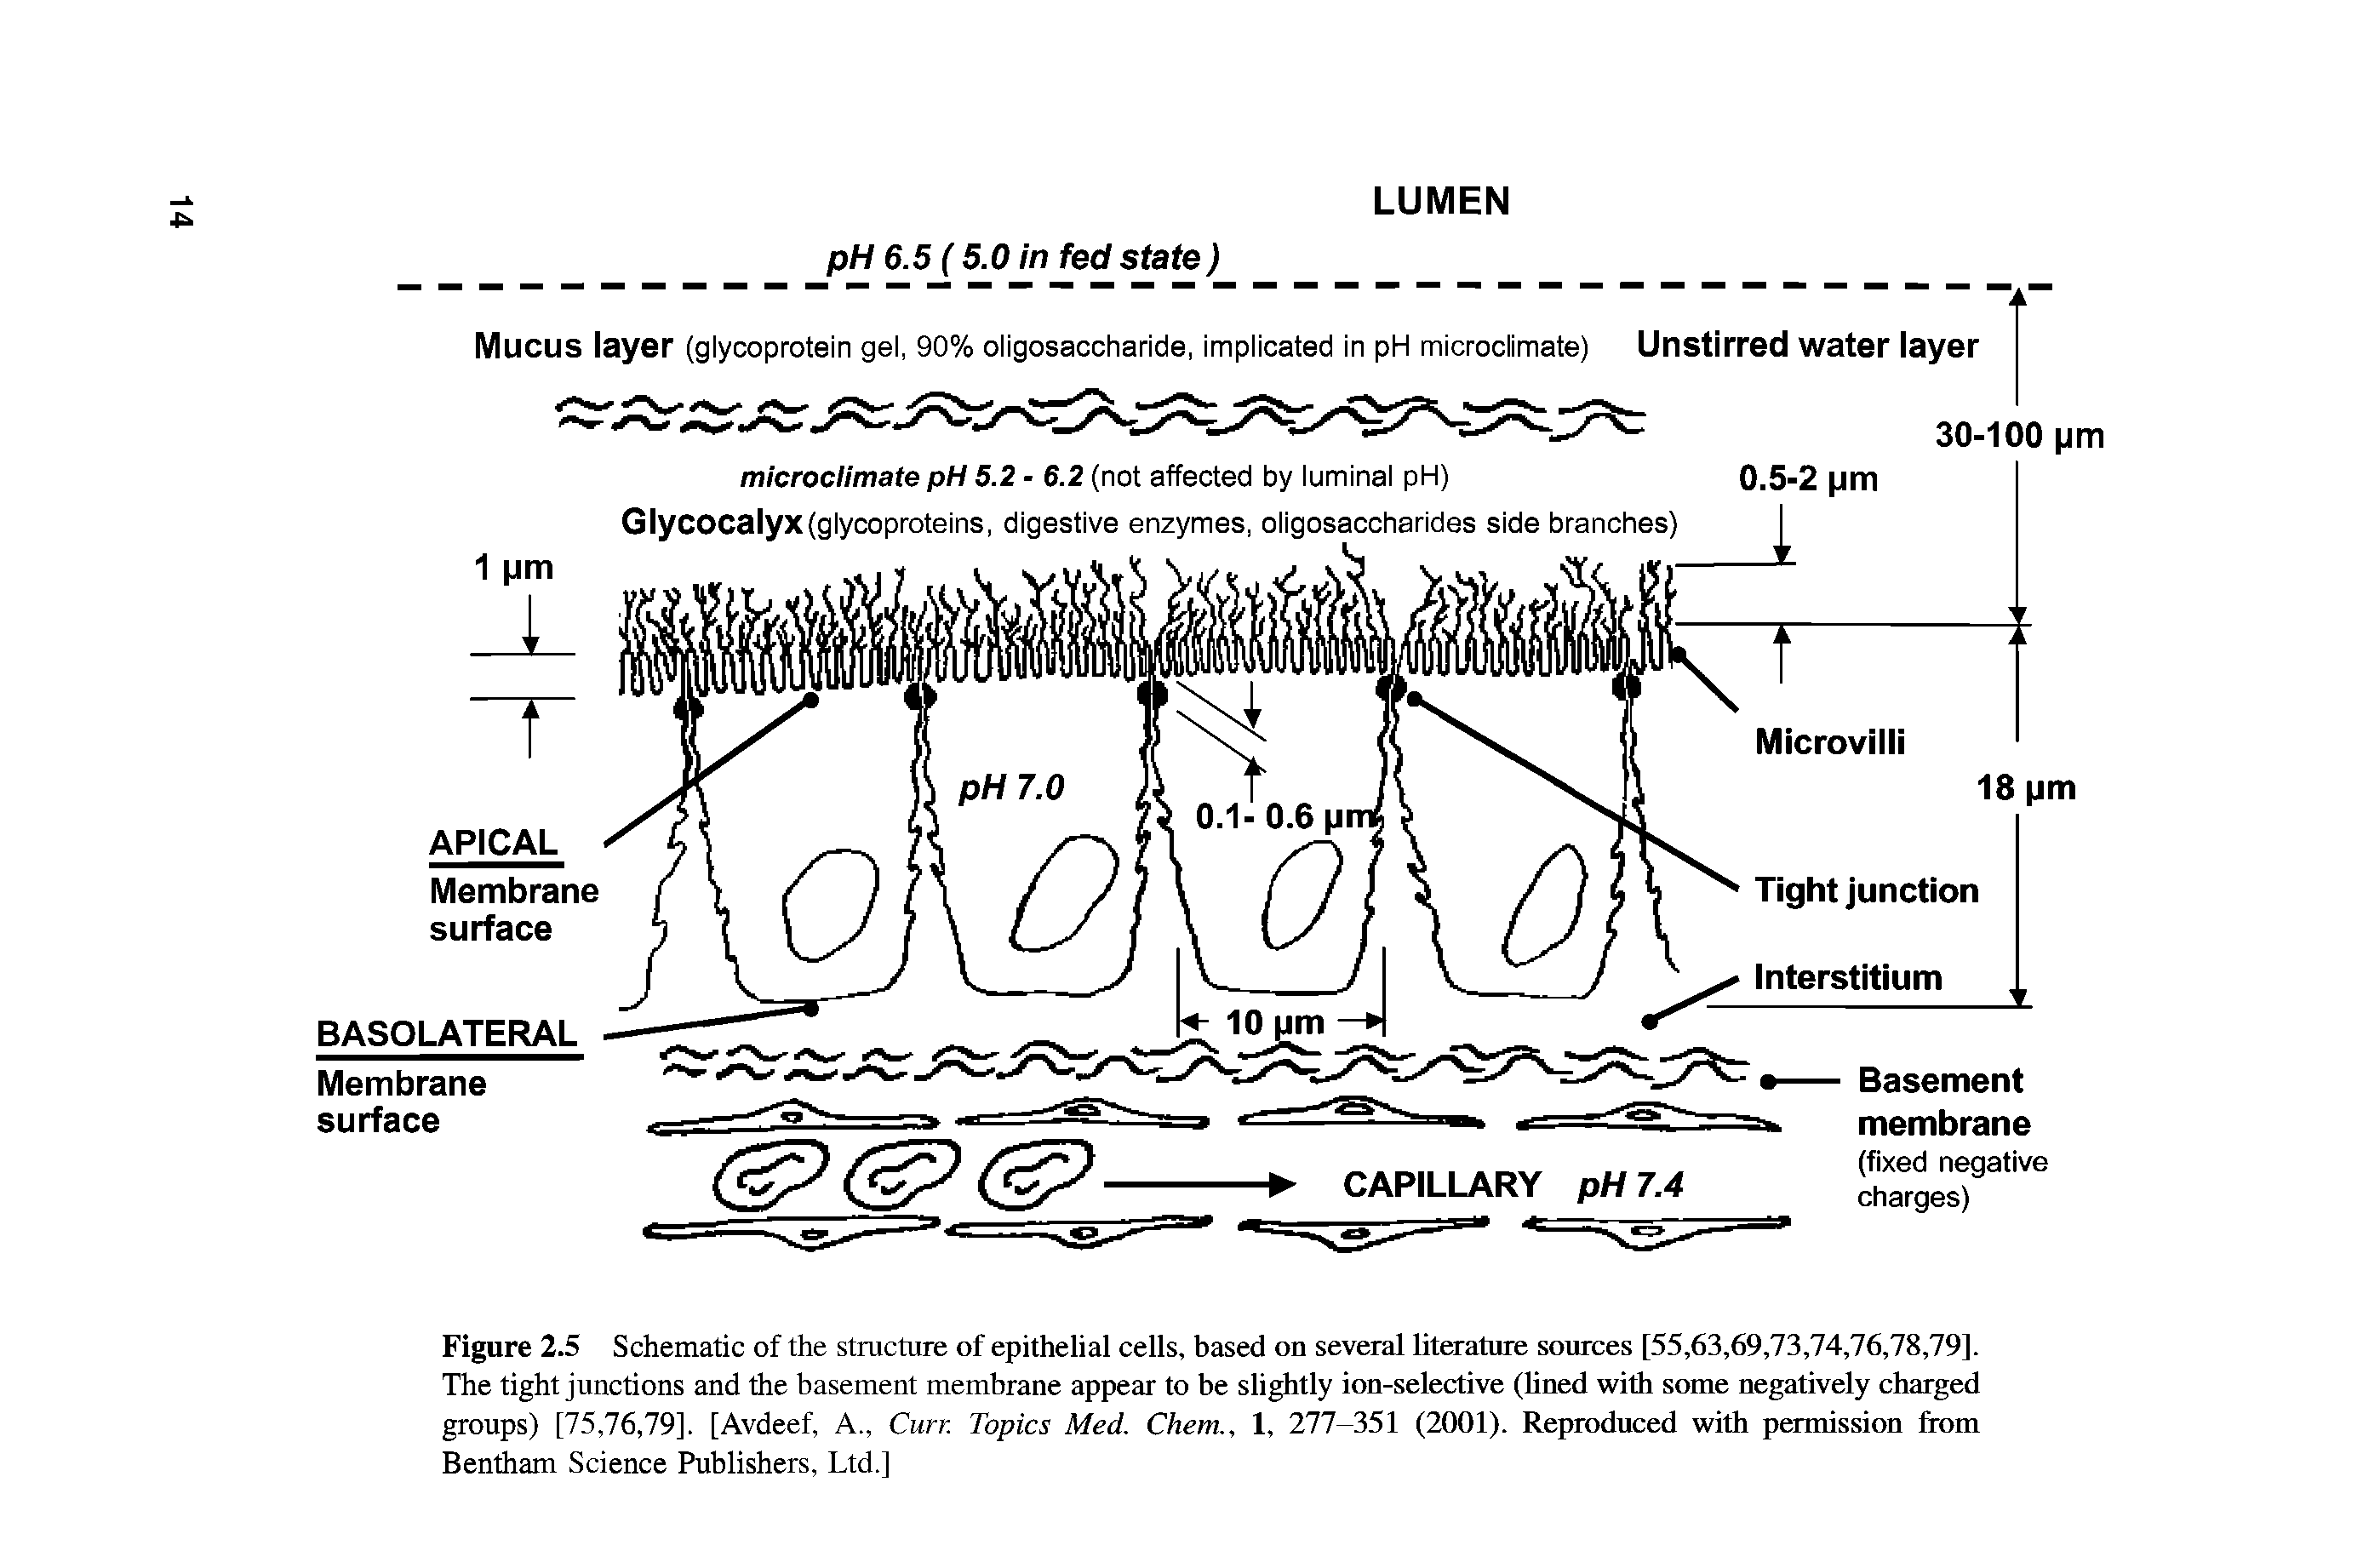 Figure 2.5 Schematic of the structure of epithelial cells, based on several literature sources [55,63,69,73,74,76,78,79]. The tight junctions and the basement membrane appear to be slightly ion-selective (lined with some negatively charged groups) [75,76,79]. [Avdeef, A., Curr. Topics Med. Chem., 1, 277-351 (2001). Reproduced with permission from Bentham Science Publishers, Ltd.]...